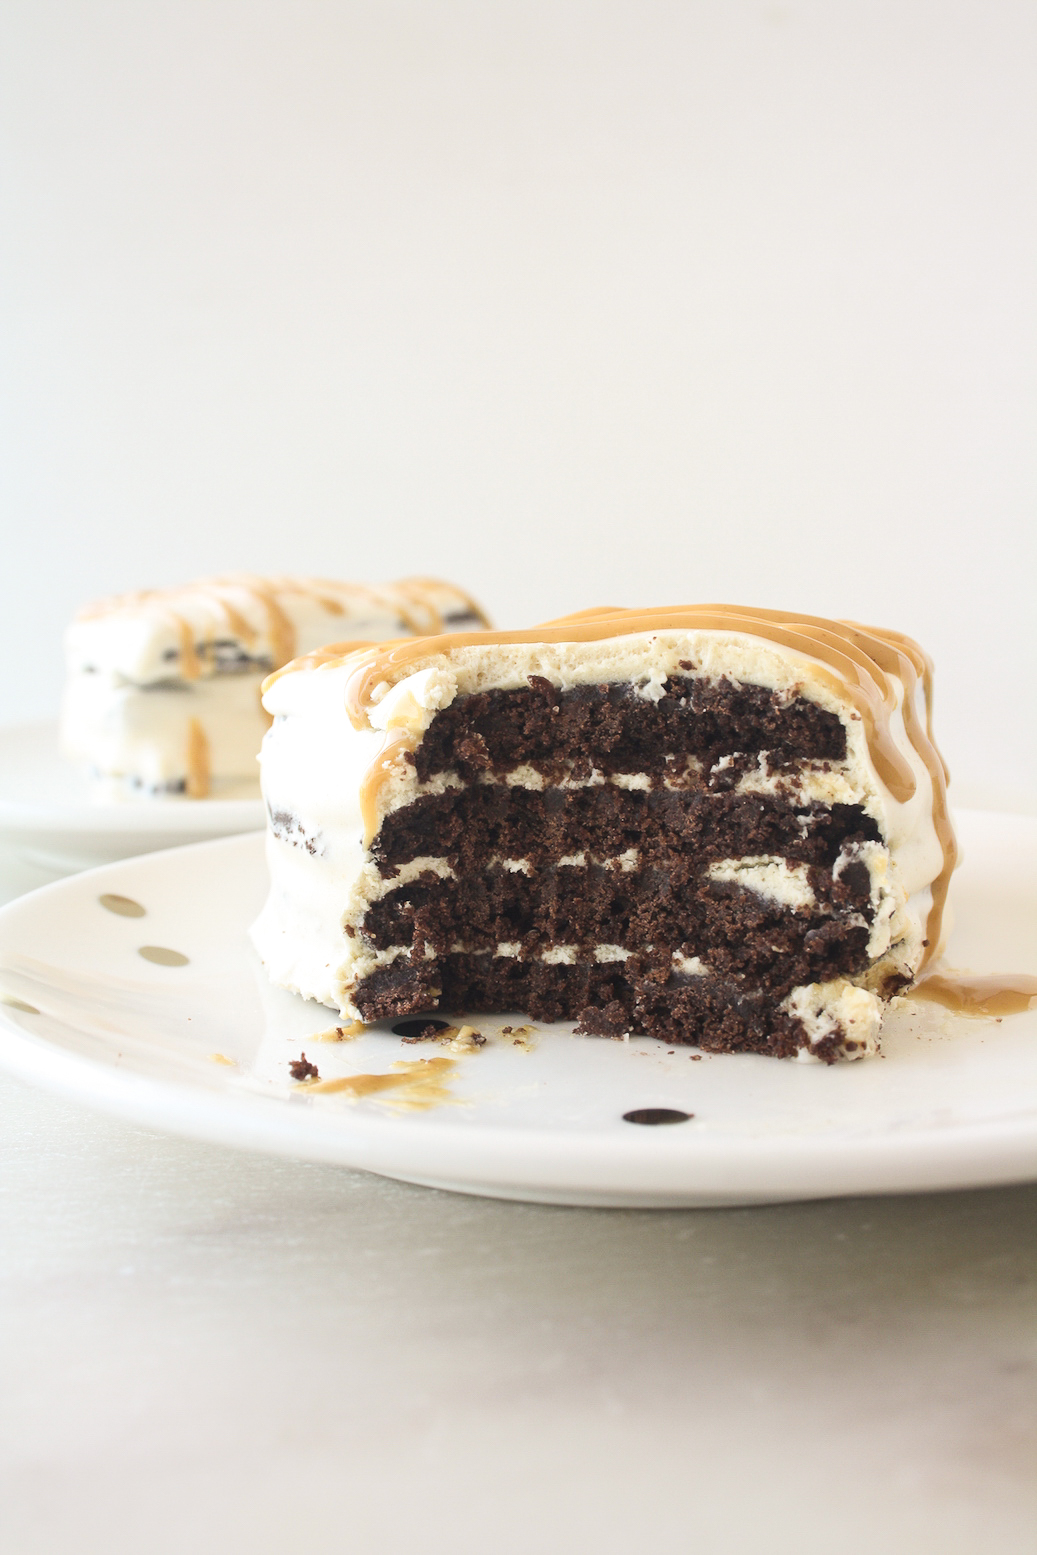 Easy and delicious icebox cakes with homemade chocolate cookies and peanut butter whipped cream!